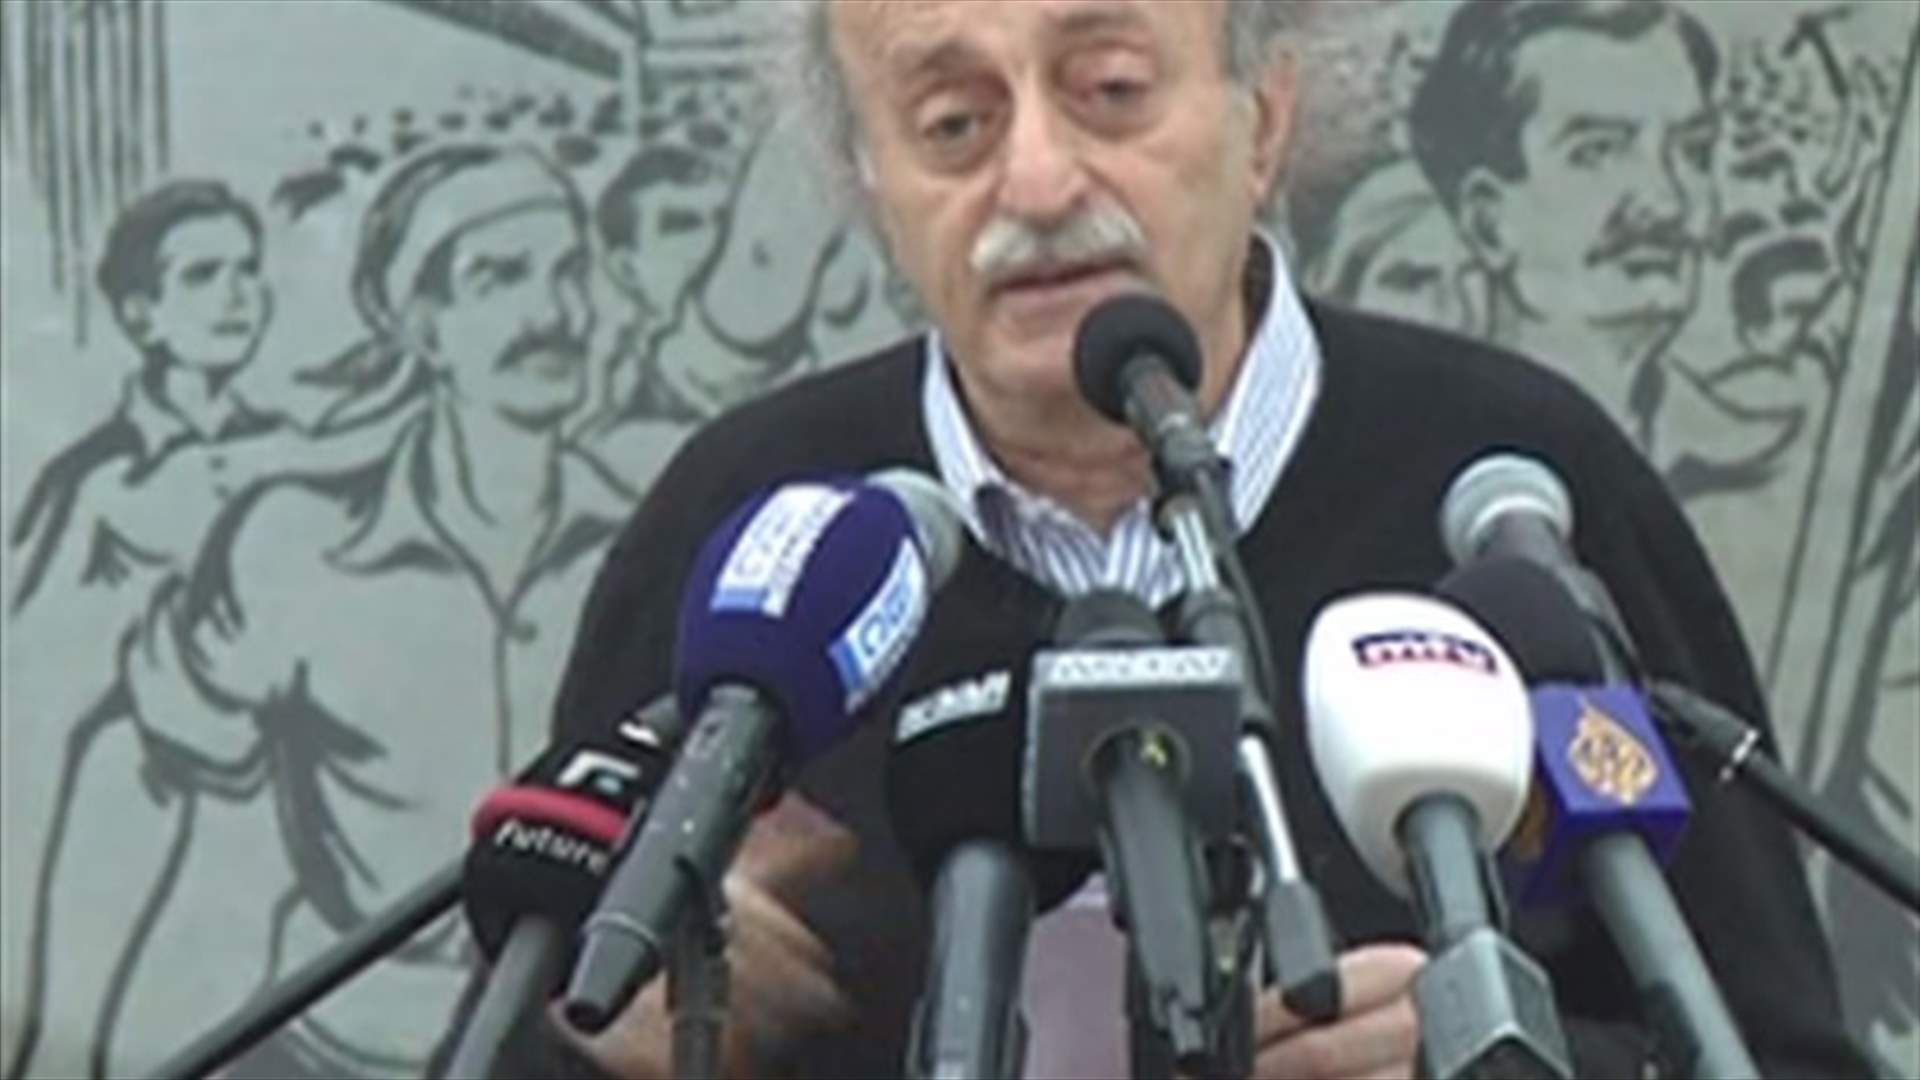 MP Jumblatt says time has come for a change within PSP leadership